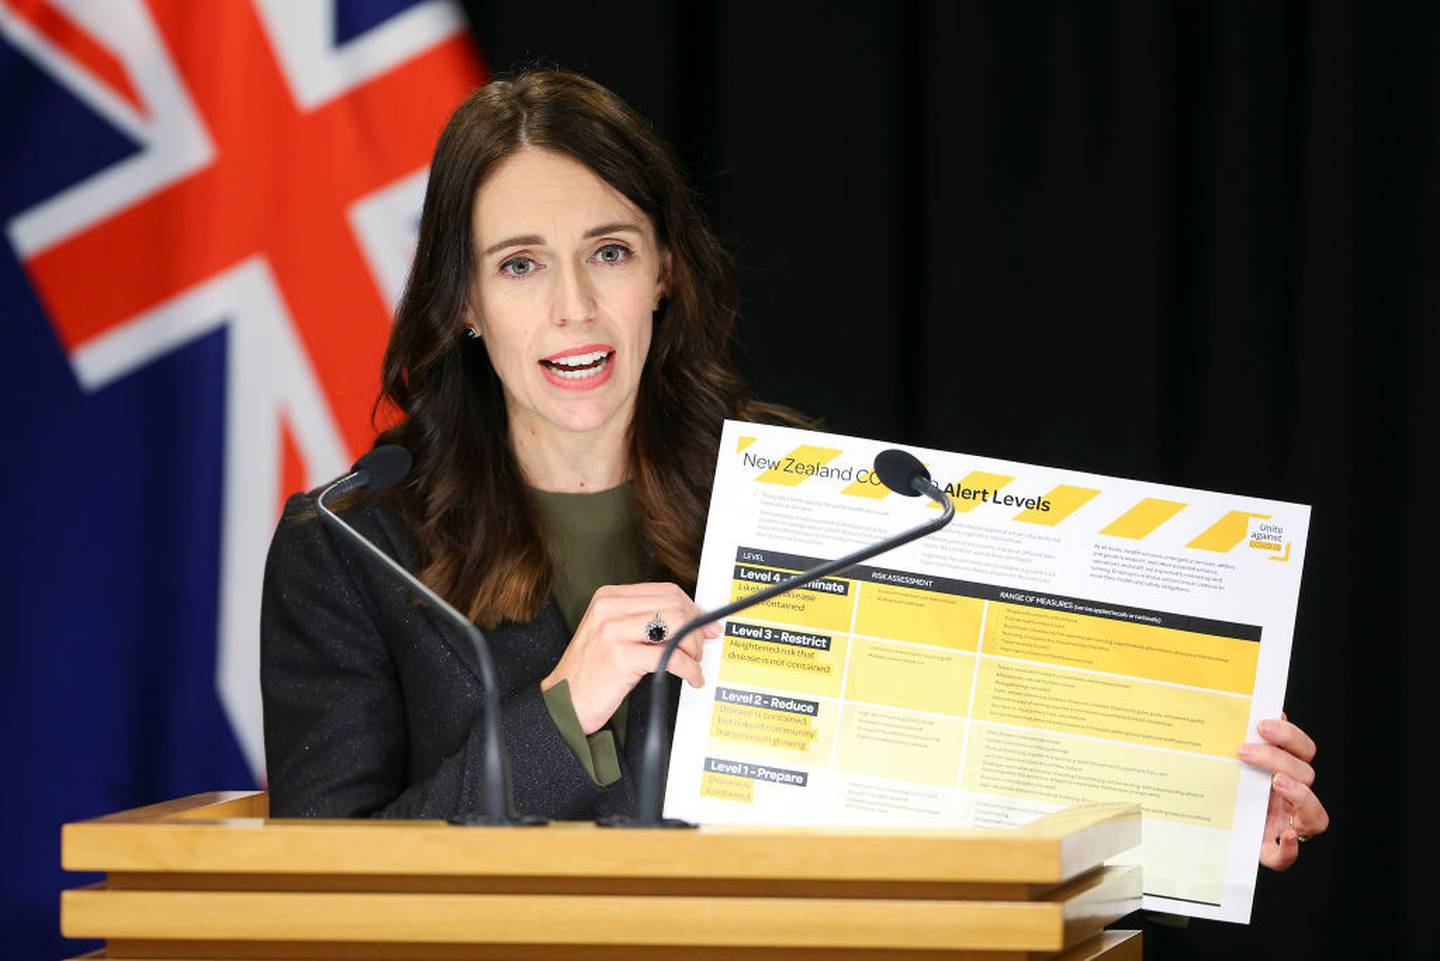 Prime Minister Jacinda Ardern holds up information on Covid-19 alert levels during a press conference at Parliament on March 21, 2020. There are calls for new revised alert levels. Photo / Getty